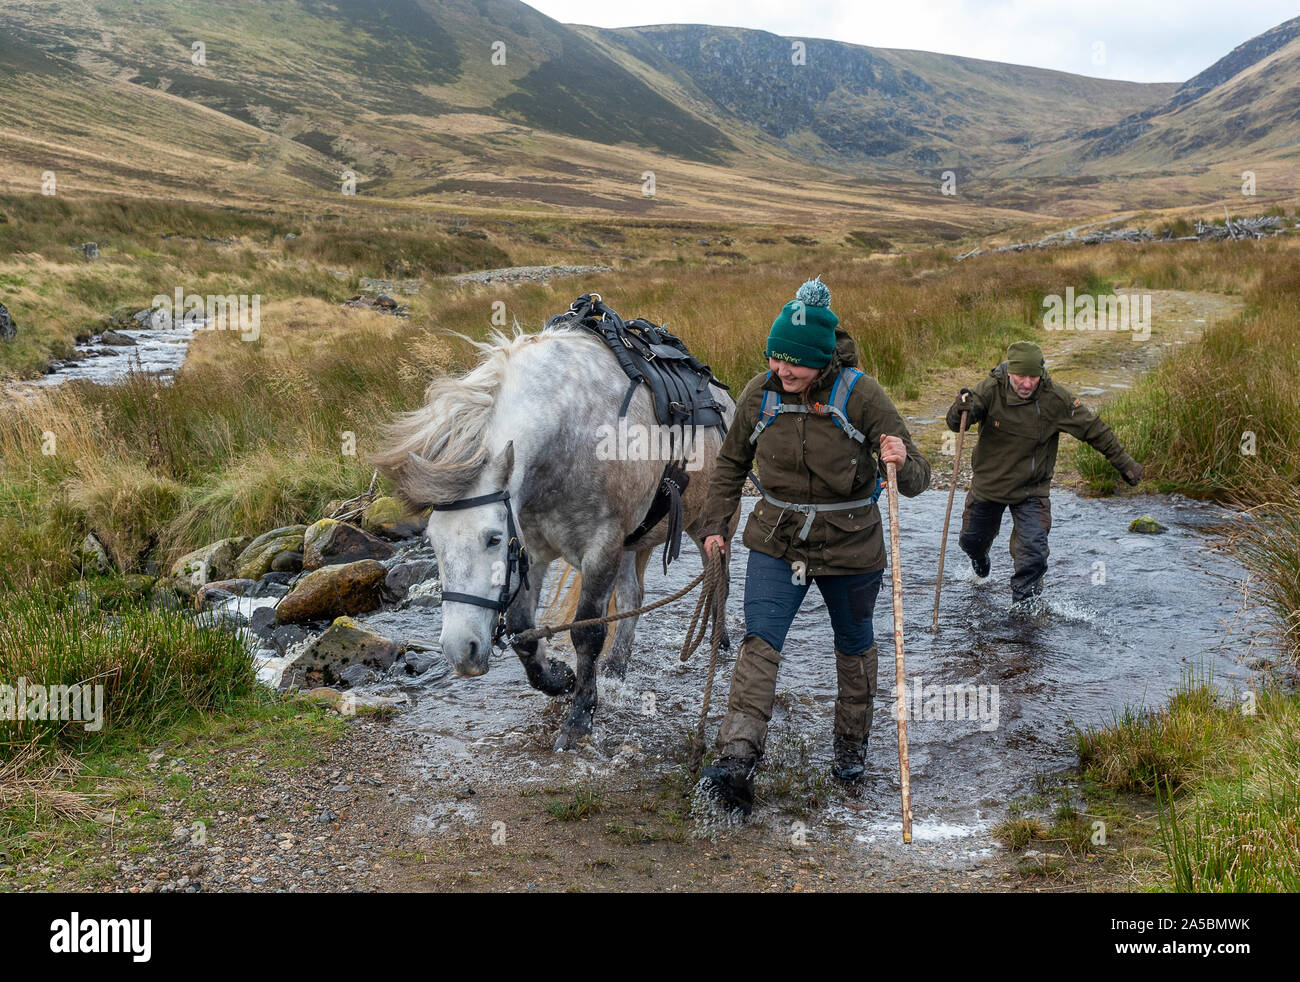 The Angus Glens, Scotland, UK.  19th October 2019.   On the last day of the Red Deer Stag season, deerstalker and ghillie, along with his trained Highland Ponies which are used to carry the deer off the hill, are high on The Angus Glens, in The Highlands of Scotland, looking for the last Red Deer Stags of the season.  Credit: Matt Limb OBE/Alamy Live News Stock Photo